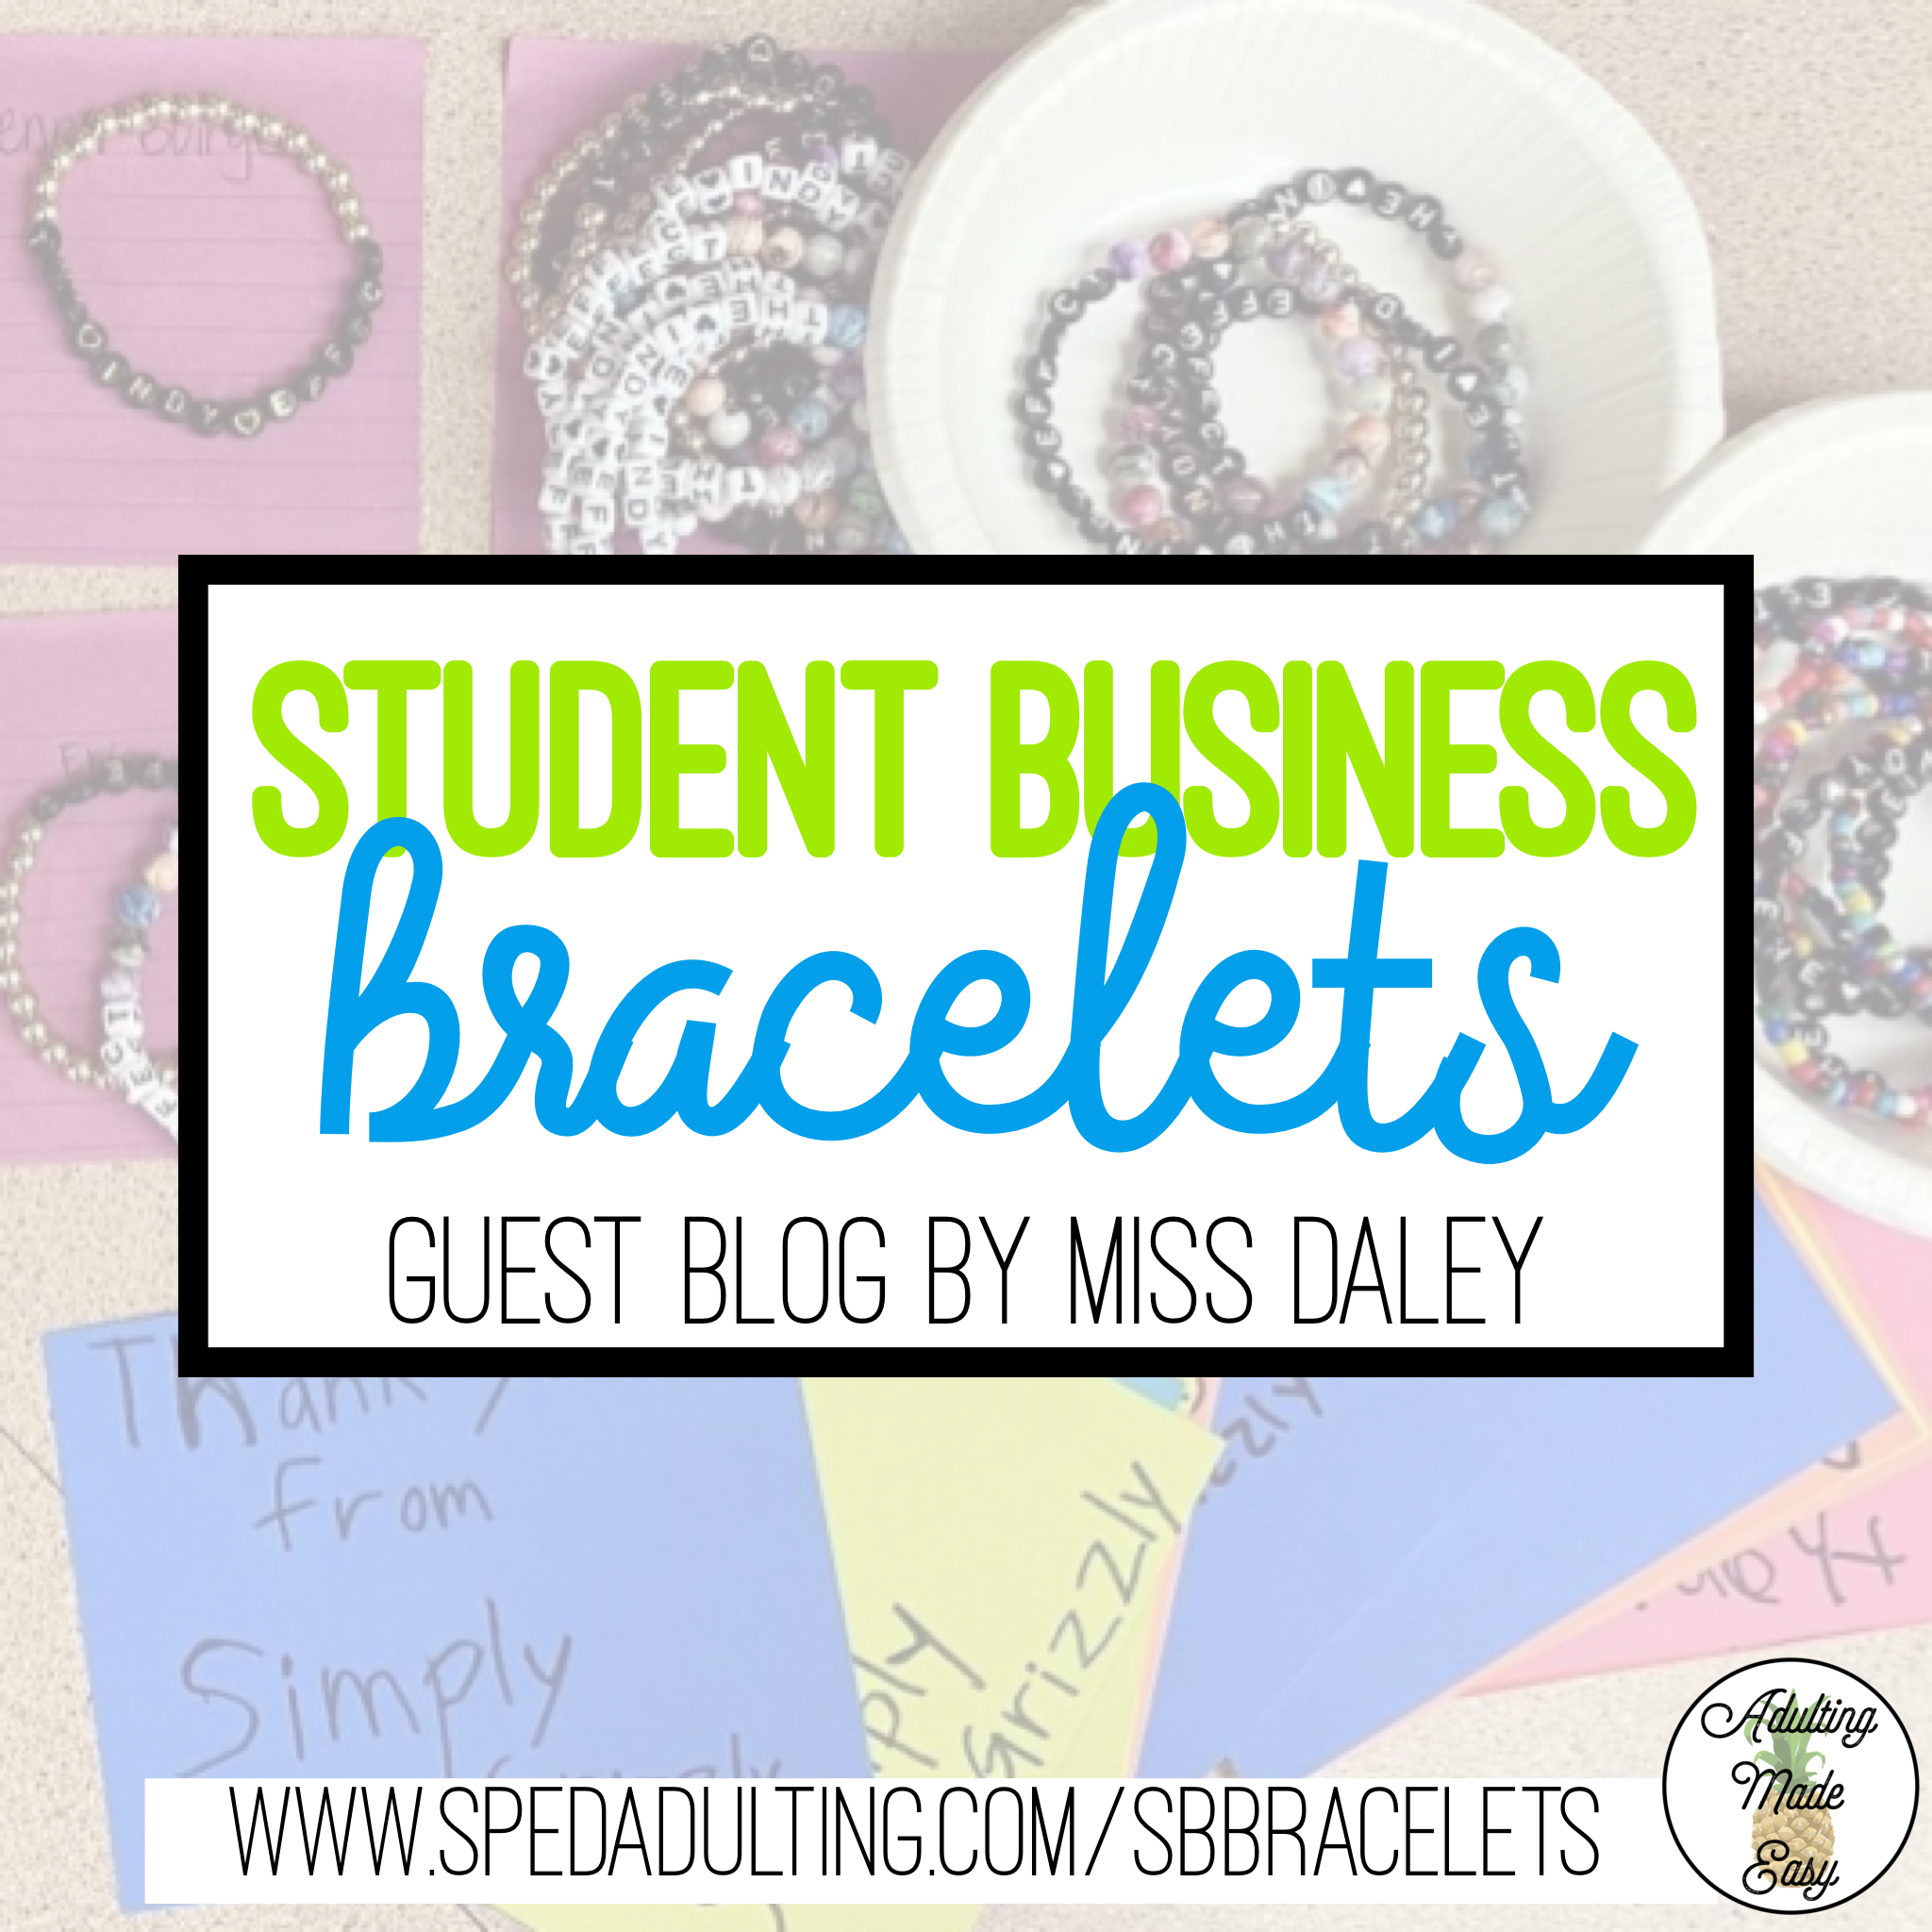 BLOG: Classroom Student Business beaded bracelets for special education students